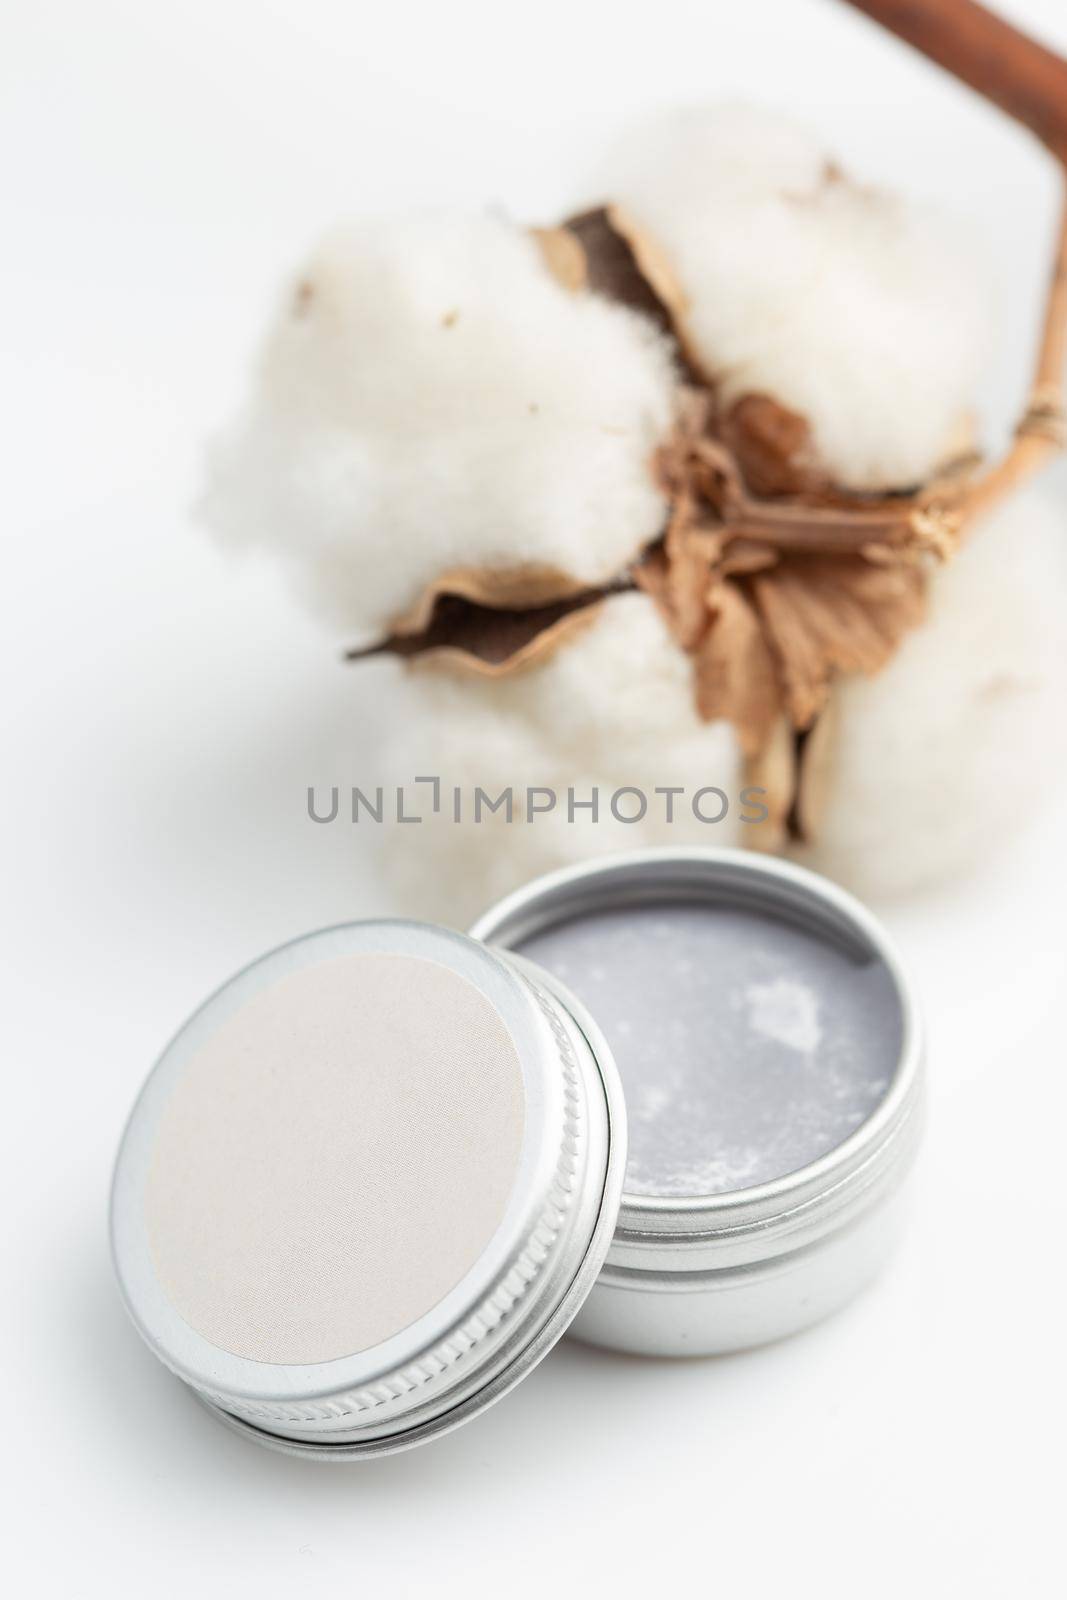 Gray metal cosmetic jar with beauty product on white background